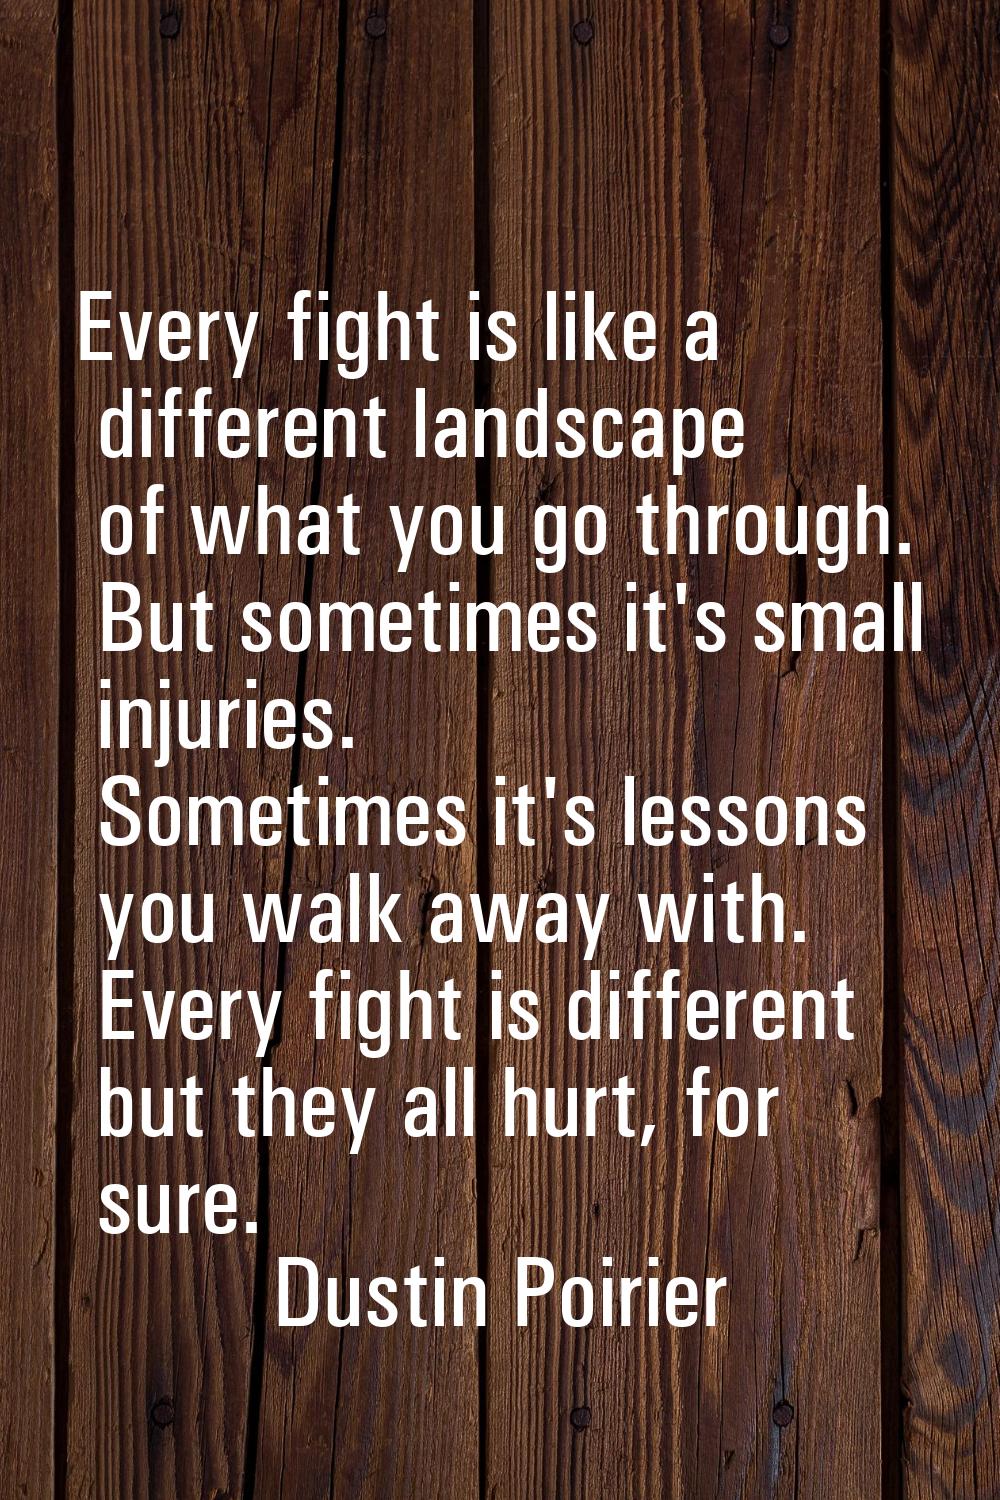 Every fight is like a different landscape of what you go through. But sometimes it's small injuries